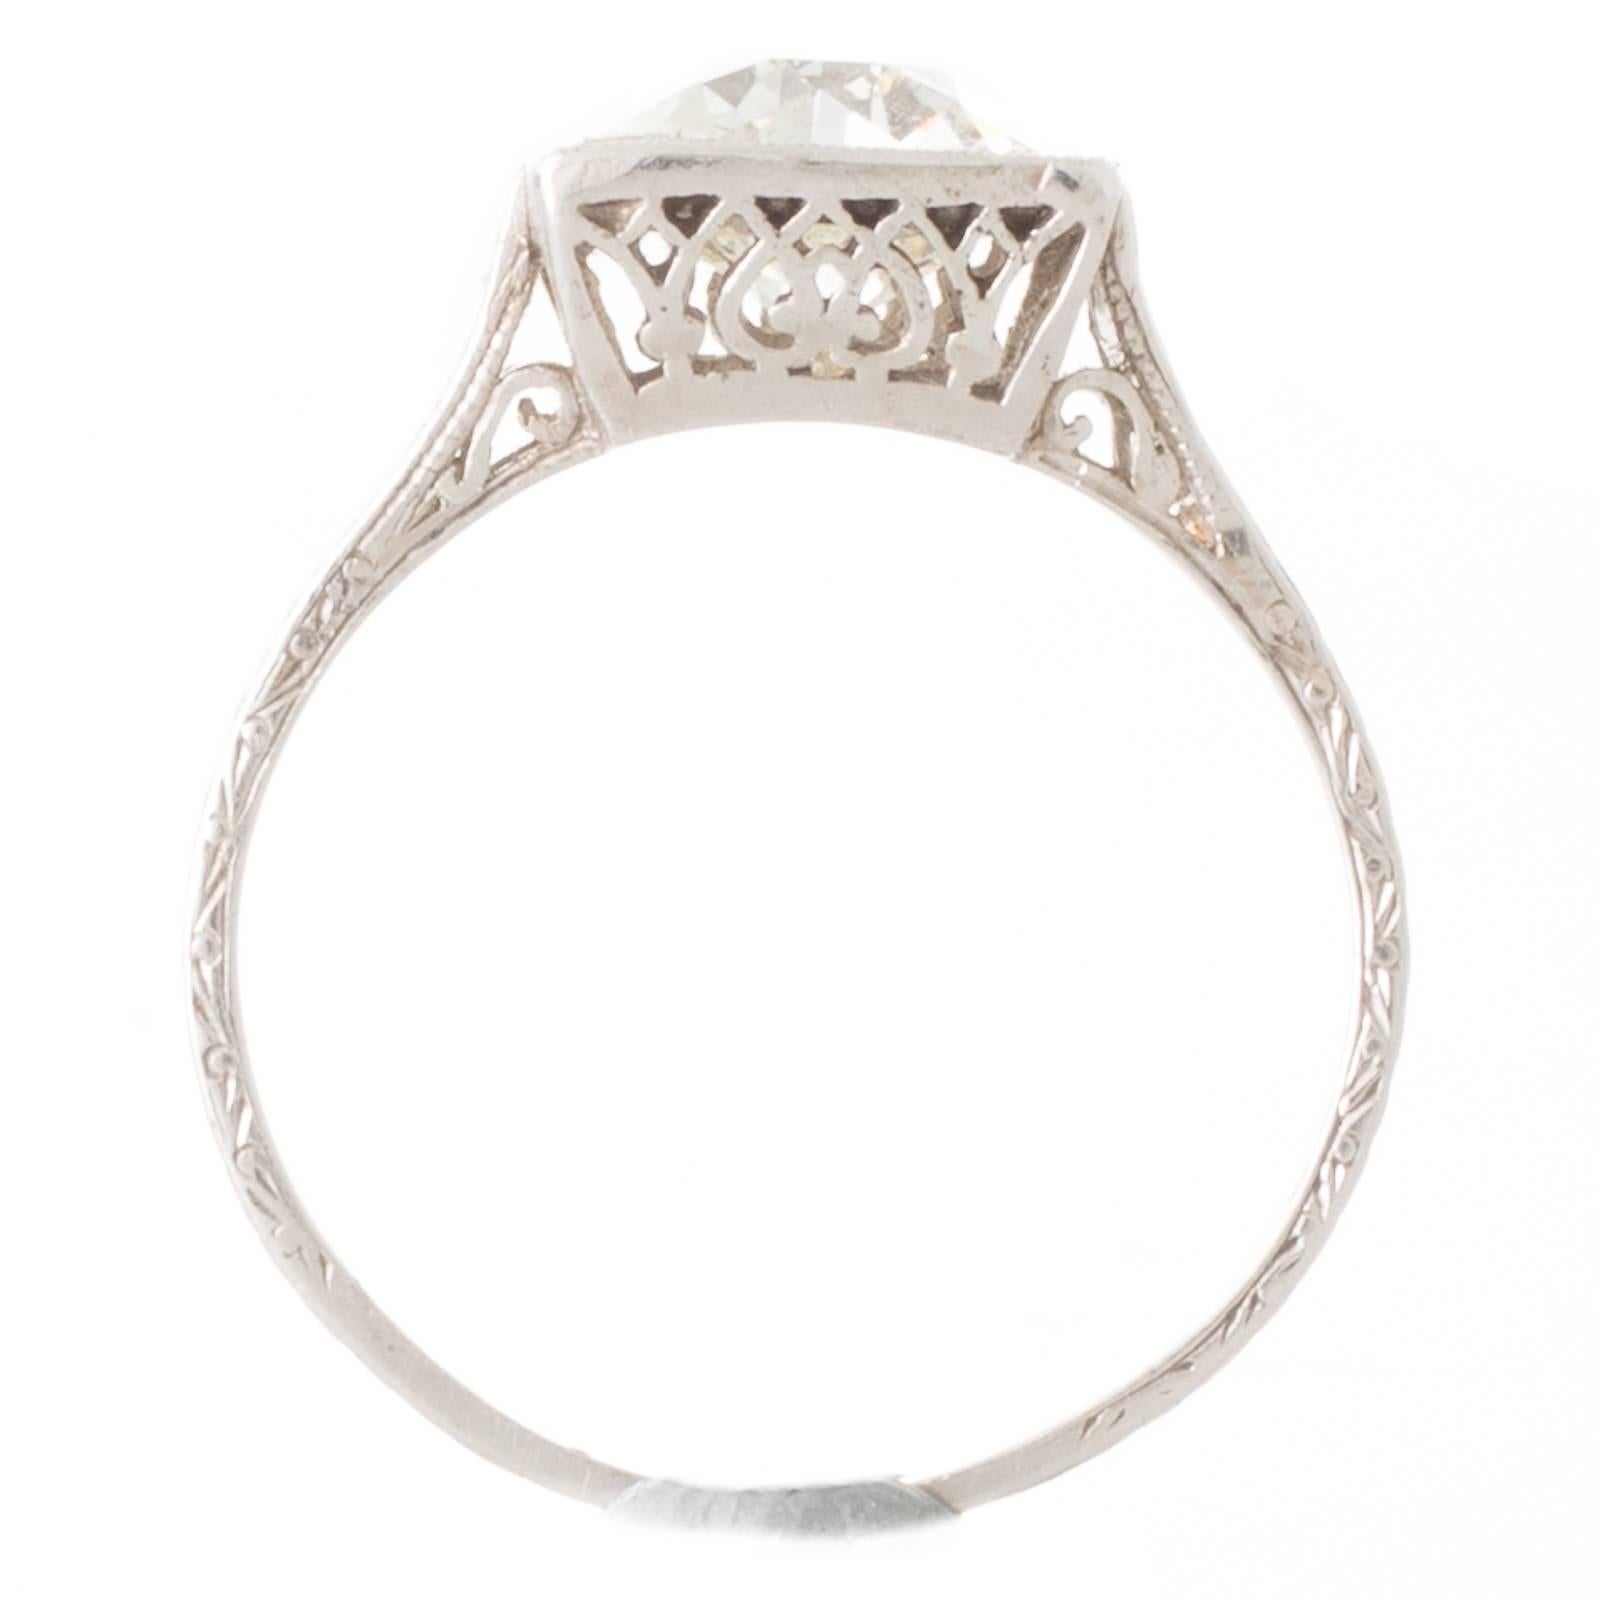 A platinum Art Deco ring featuring a 1.46ct old cut diamond, graded as colour K clarity VS1, grain set to a millegrain-edged square box mount with fine pierced detail through the gallery, all between engraved high upswept shoulders that taper down